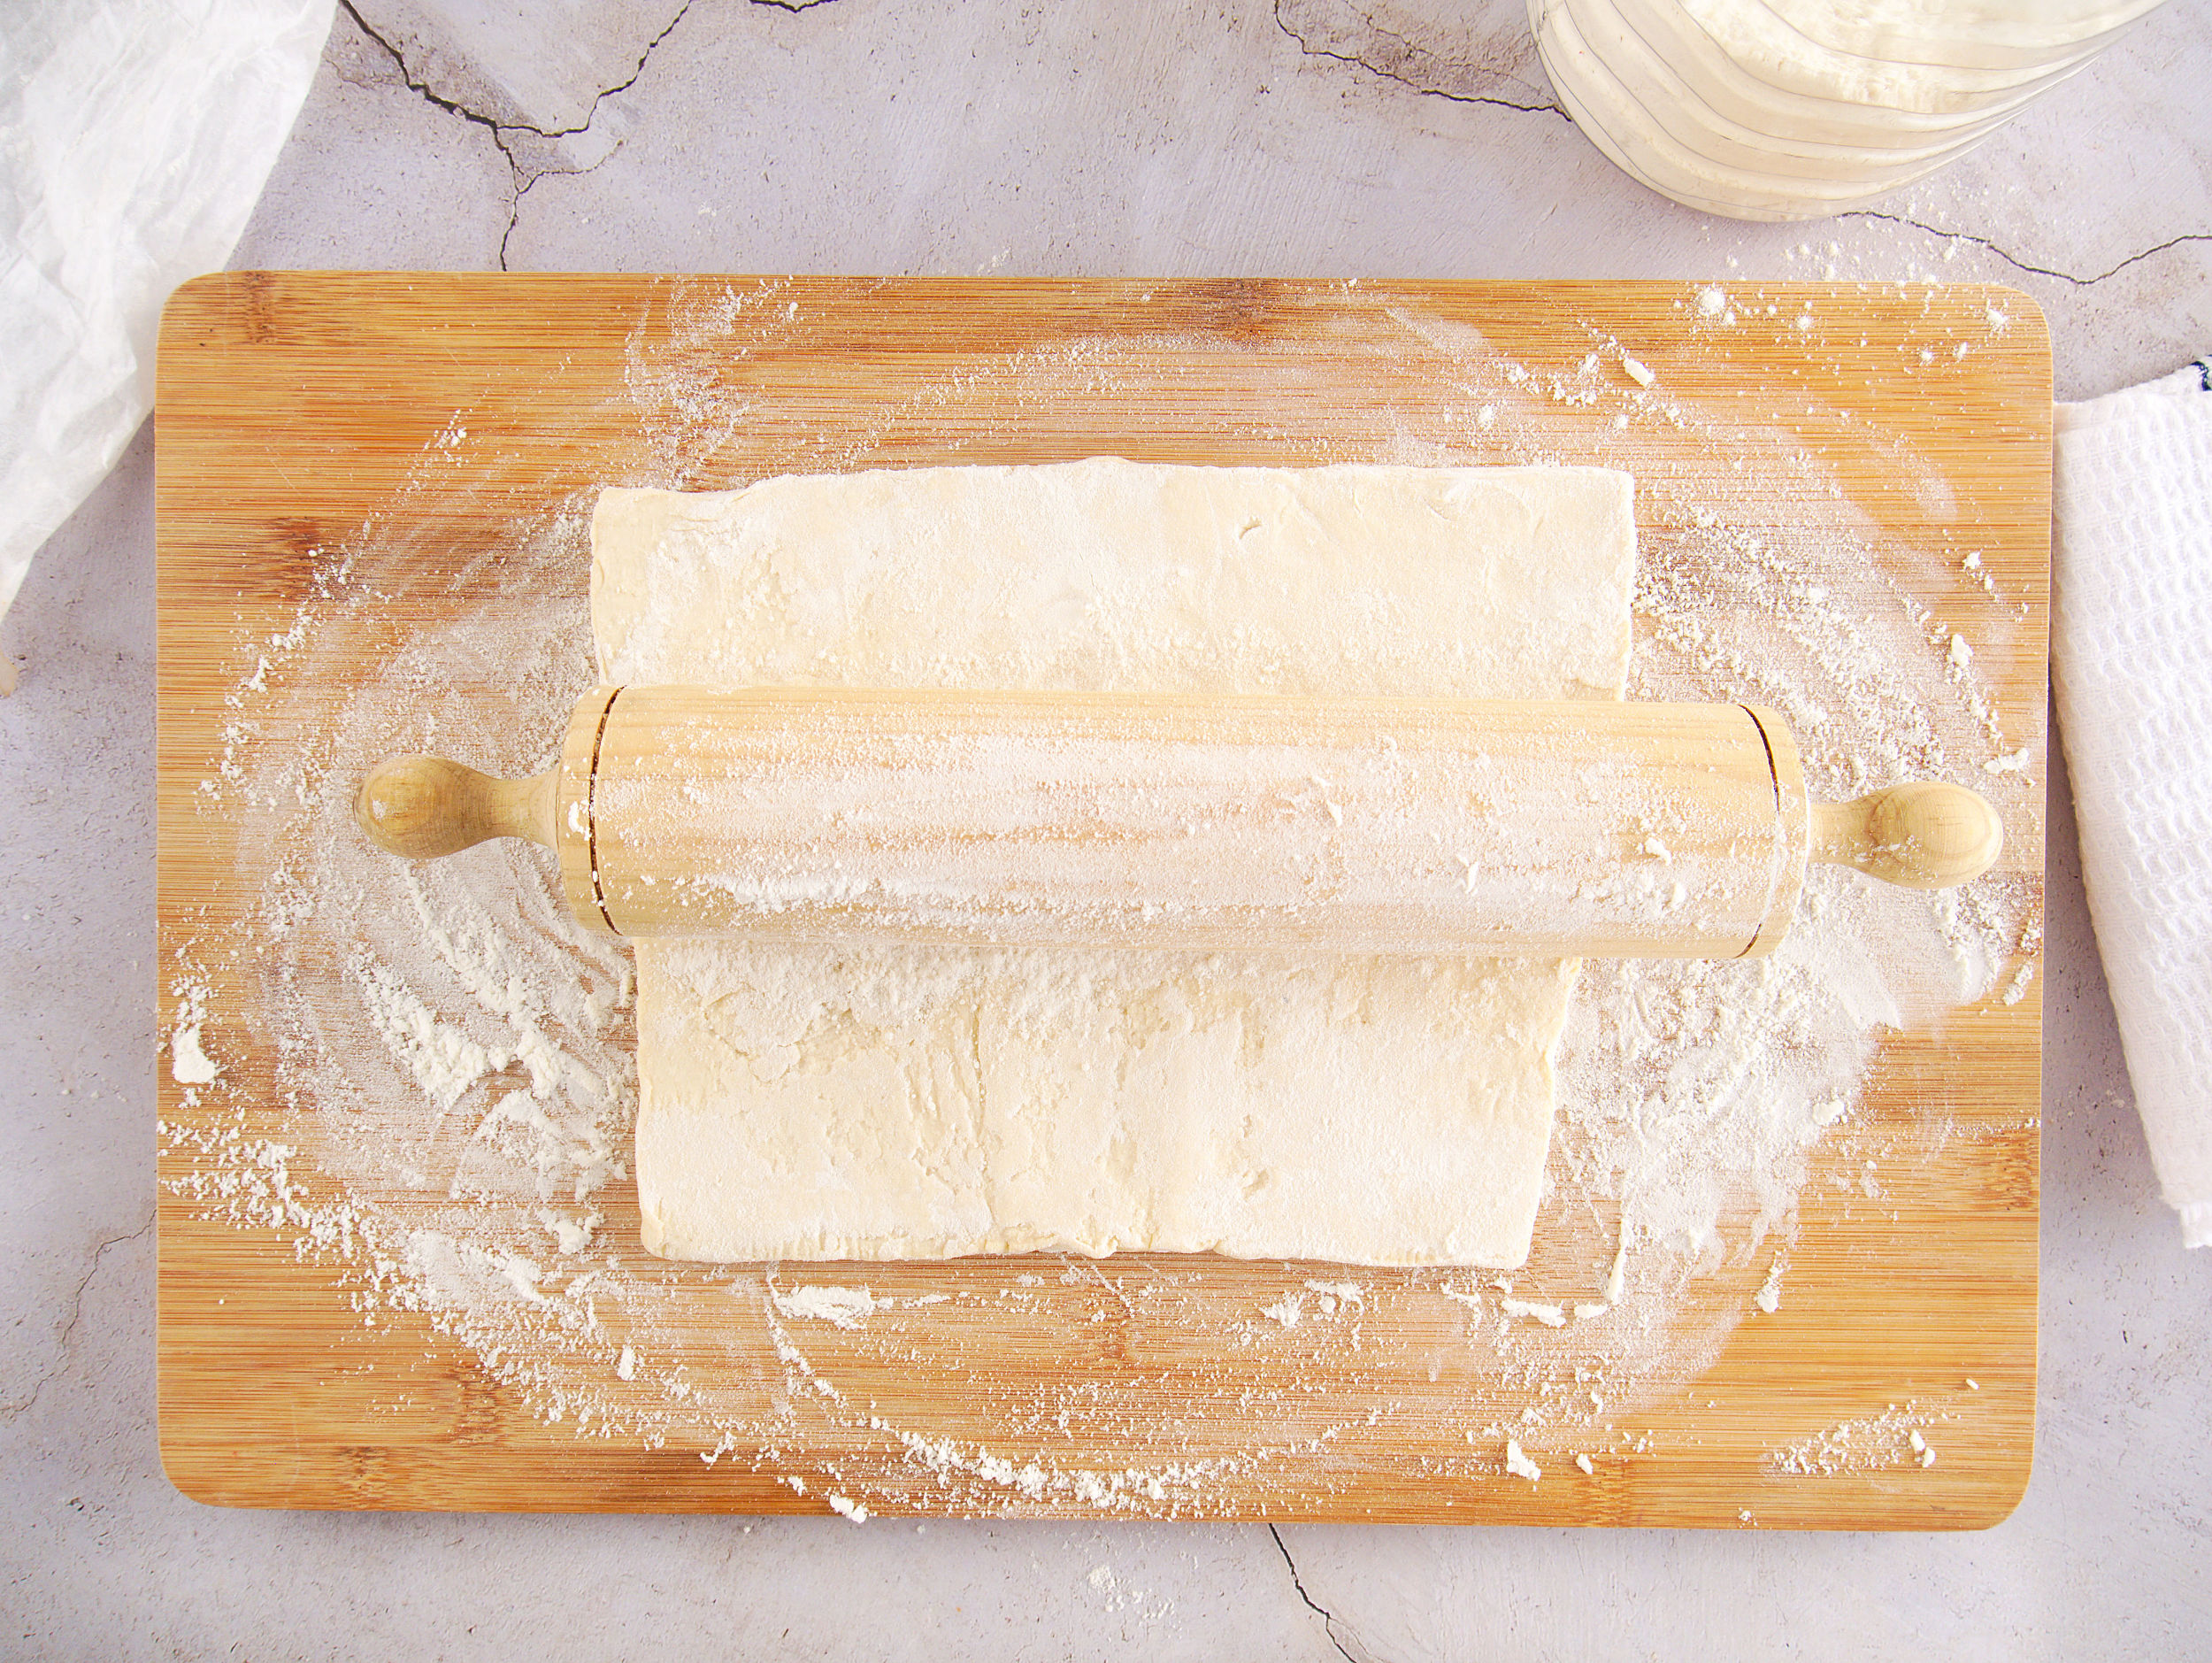 Dusting your cutting board with flour helps prevent the puff pastry from sticking